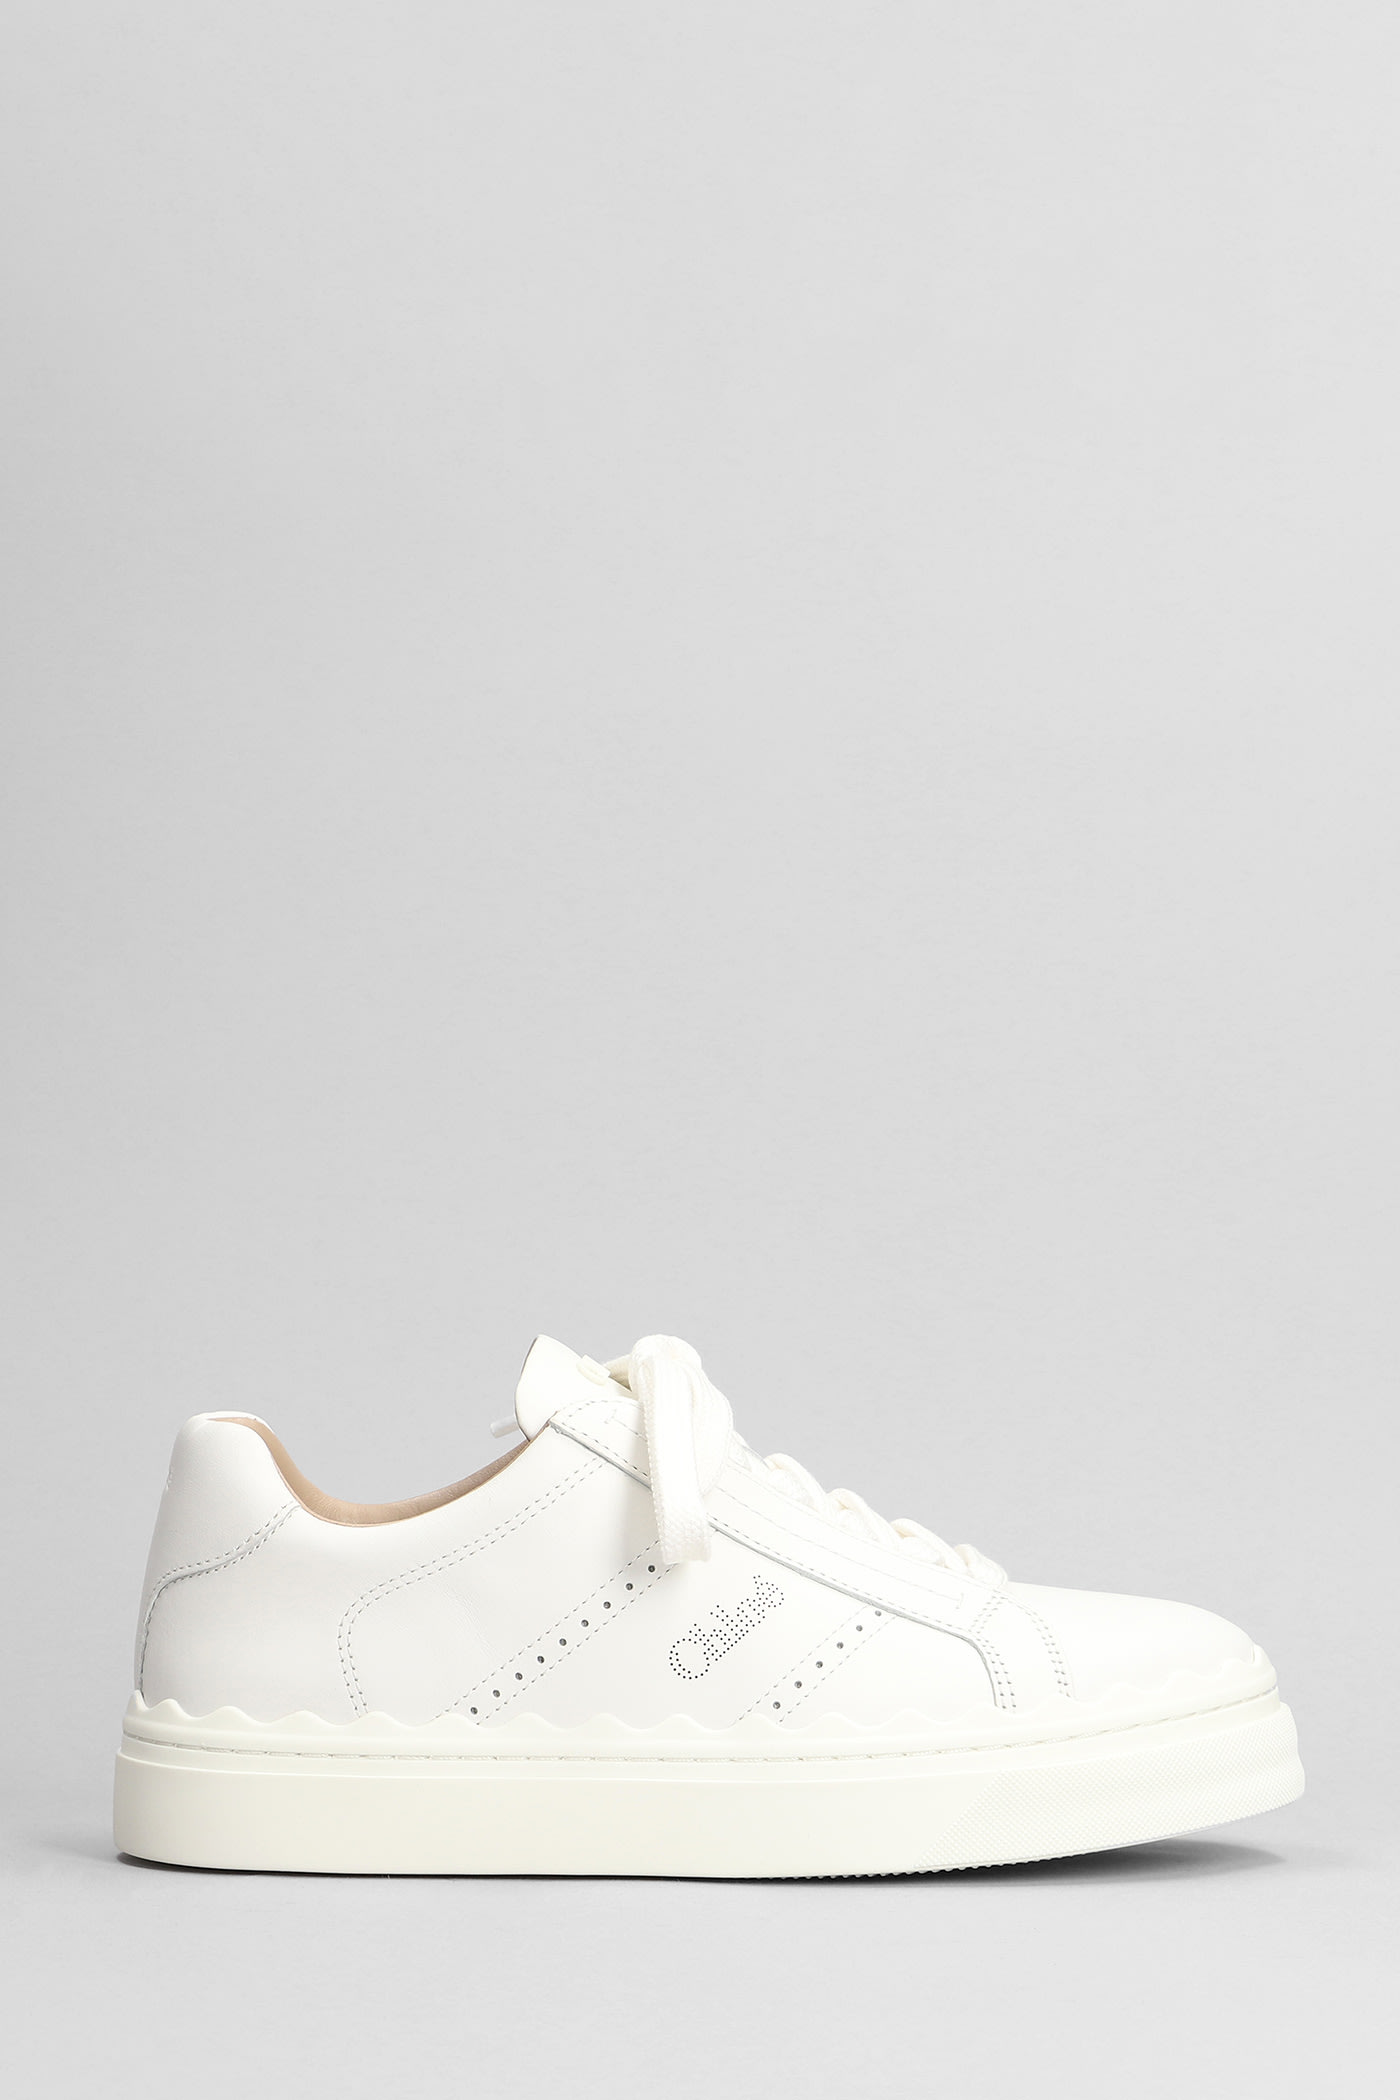 CHLOÉ LAUREN SNEAKERS IN WHITE LEATHER